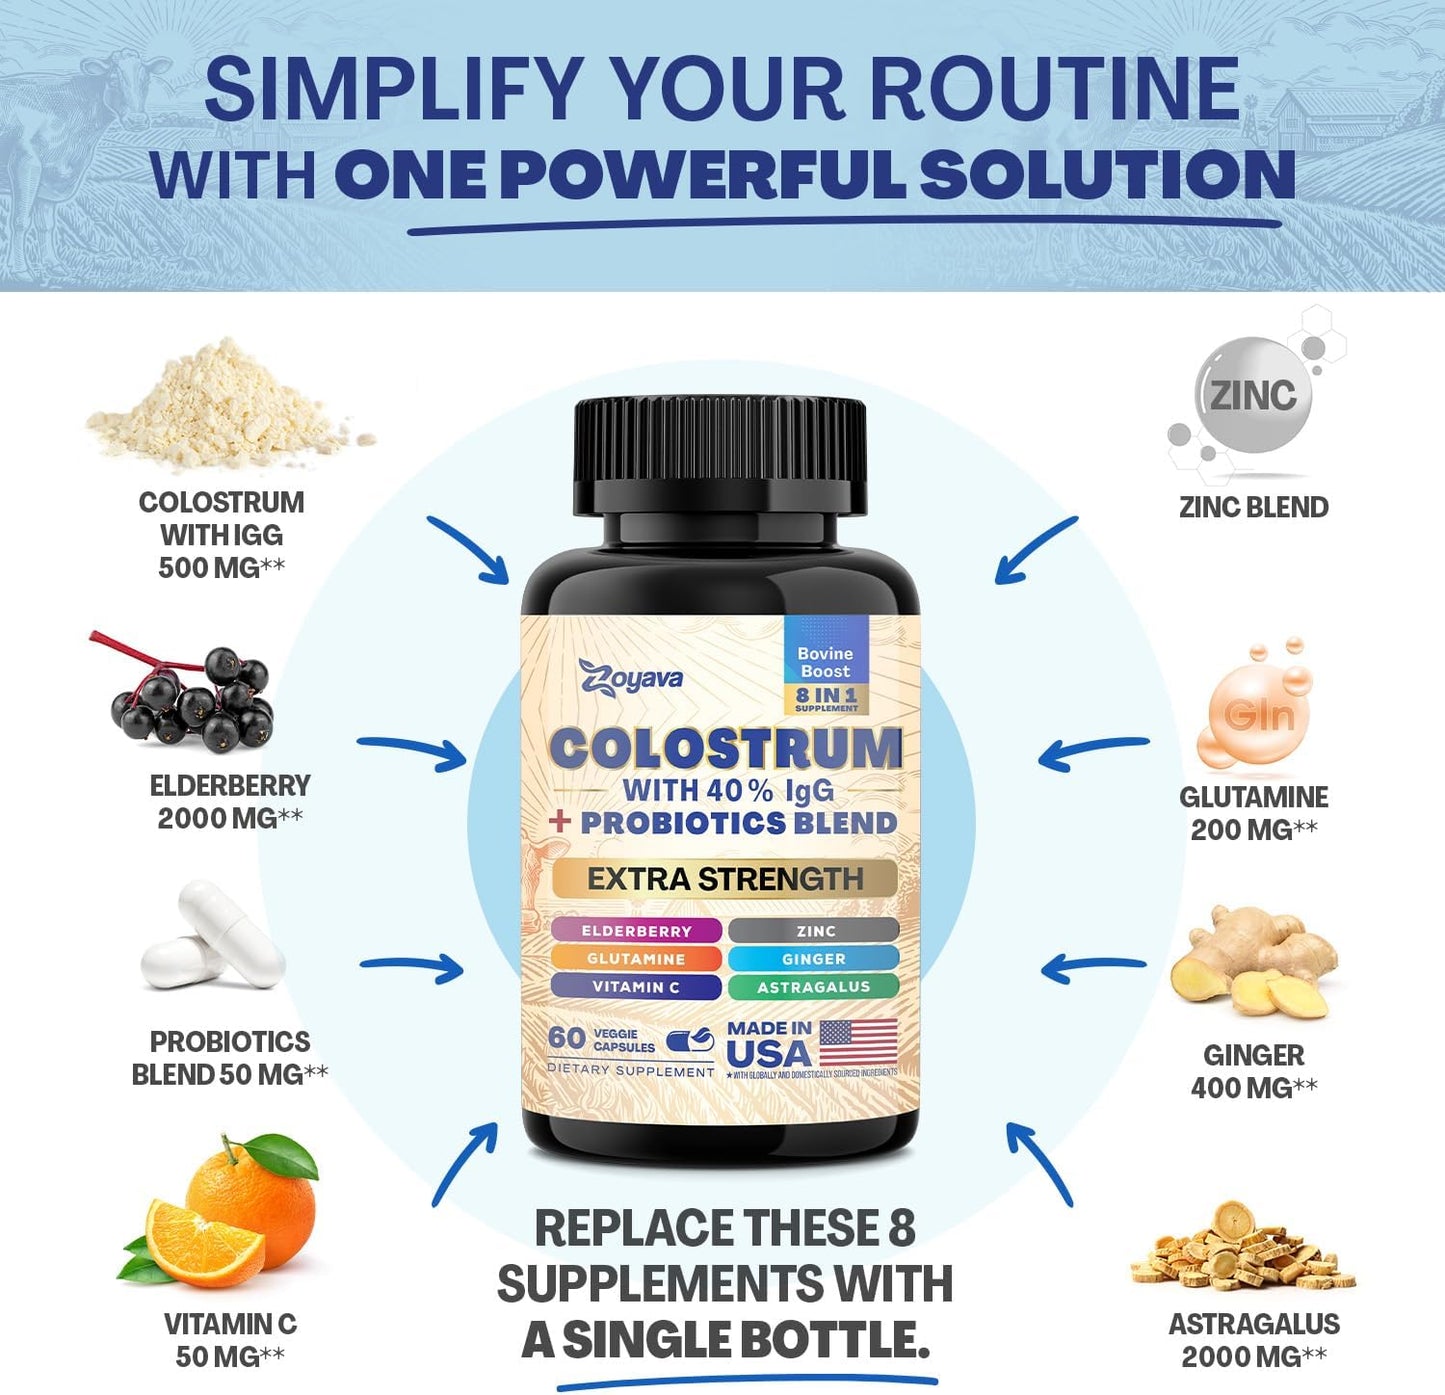 Sea Moss 16-In-1 and Collagen 14-In-1 + Colostrum 8-In-1 Supplement Bundle - 30 Day Supply